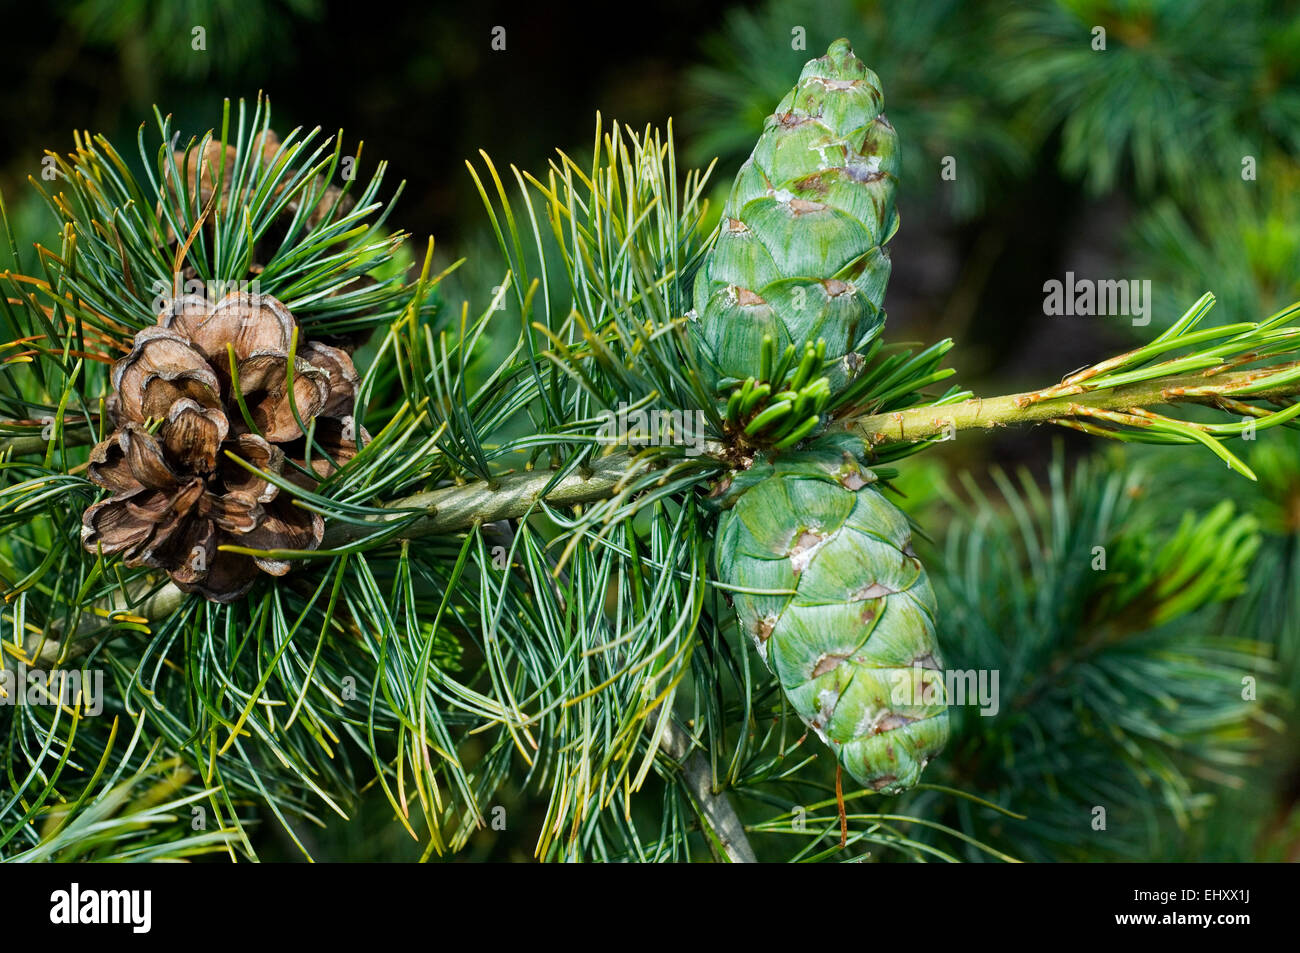 Japanese white pine / Japanese five-needle pine (Pinus parviflora / Pinus pentaphylla) close up showing old and developing cones Stock Photo